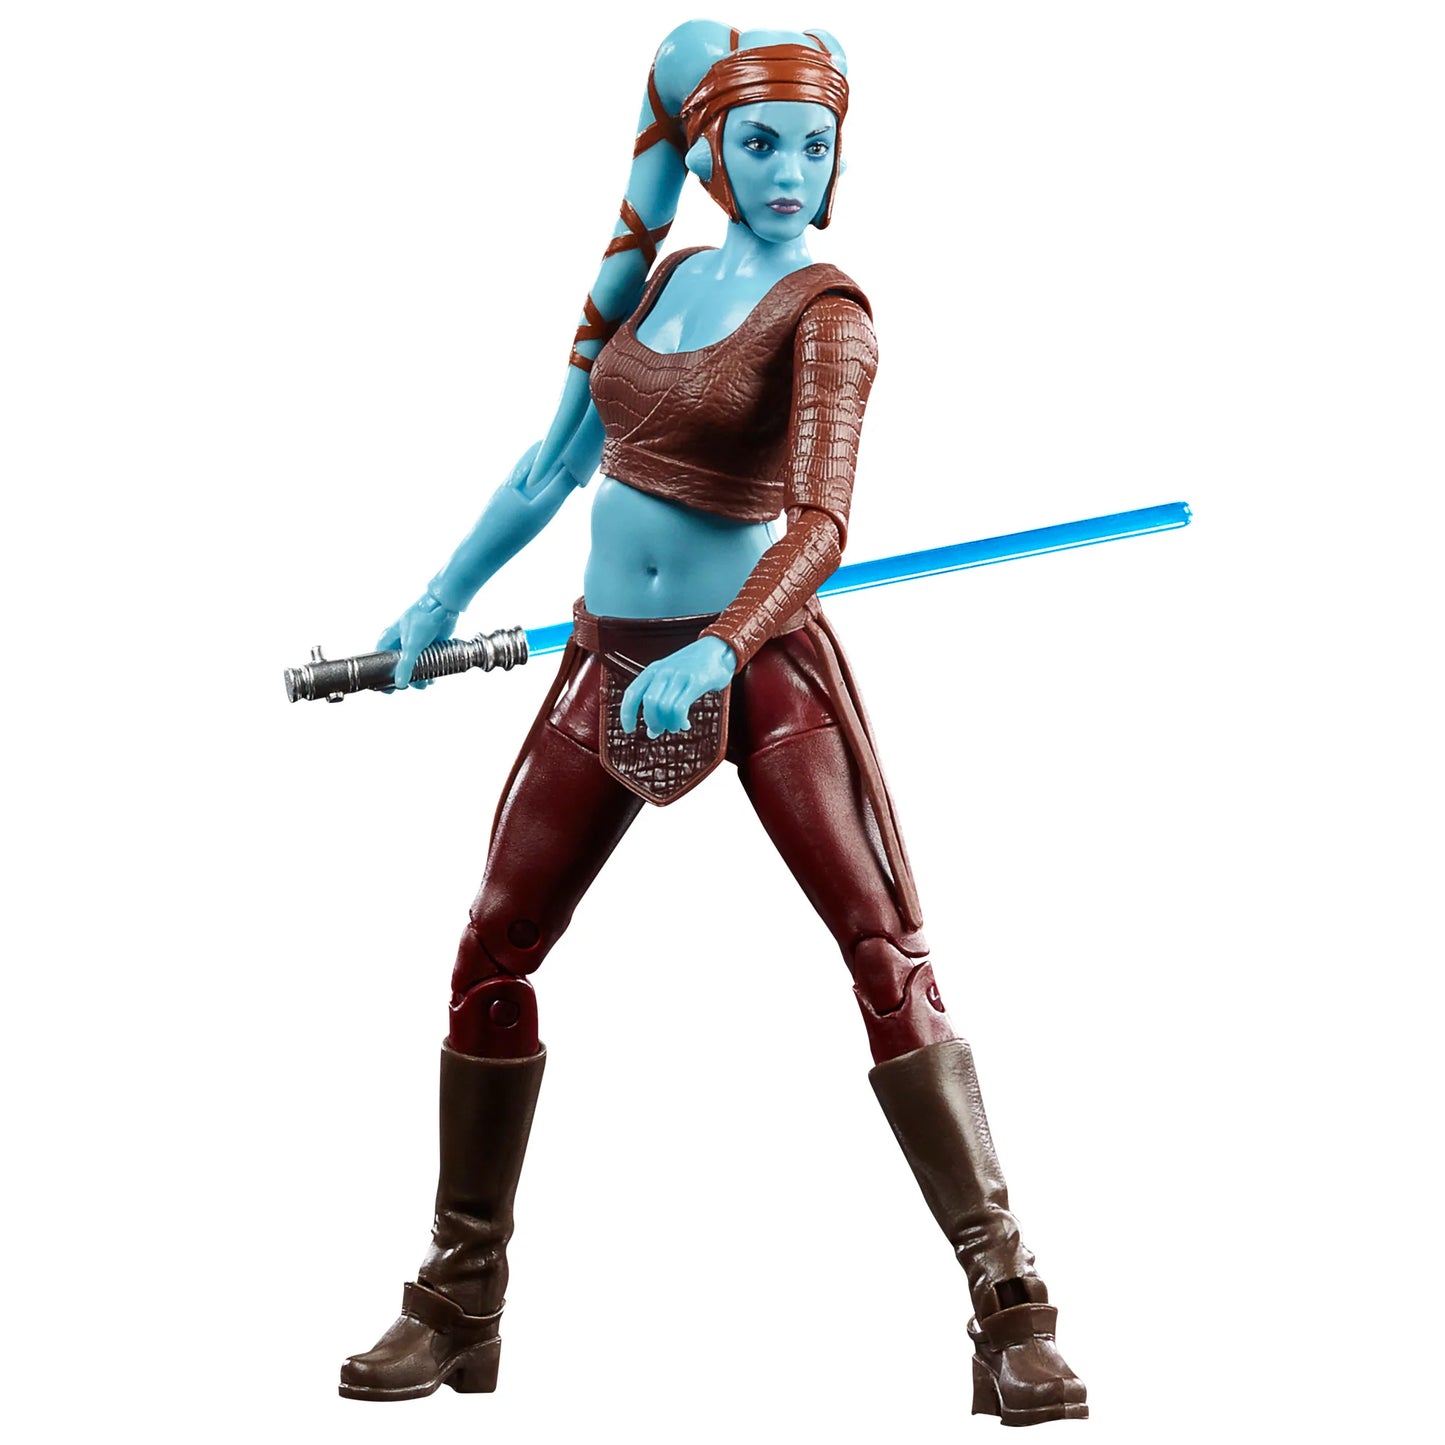 hasbro star wars attack of the clones aayla secura action figure with lightsaber